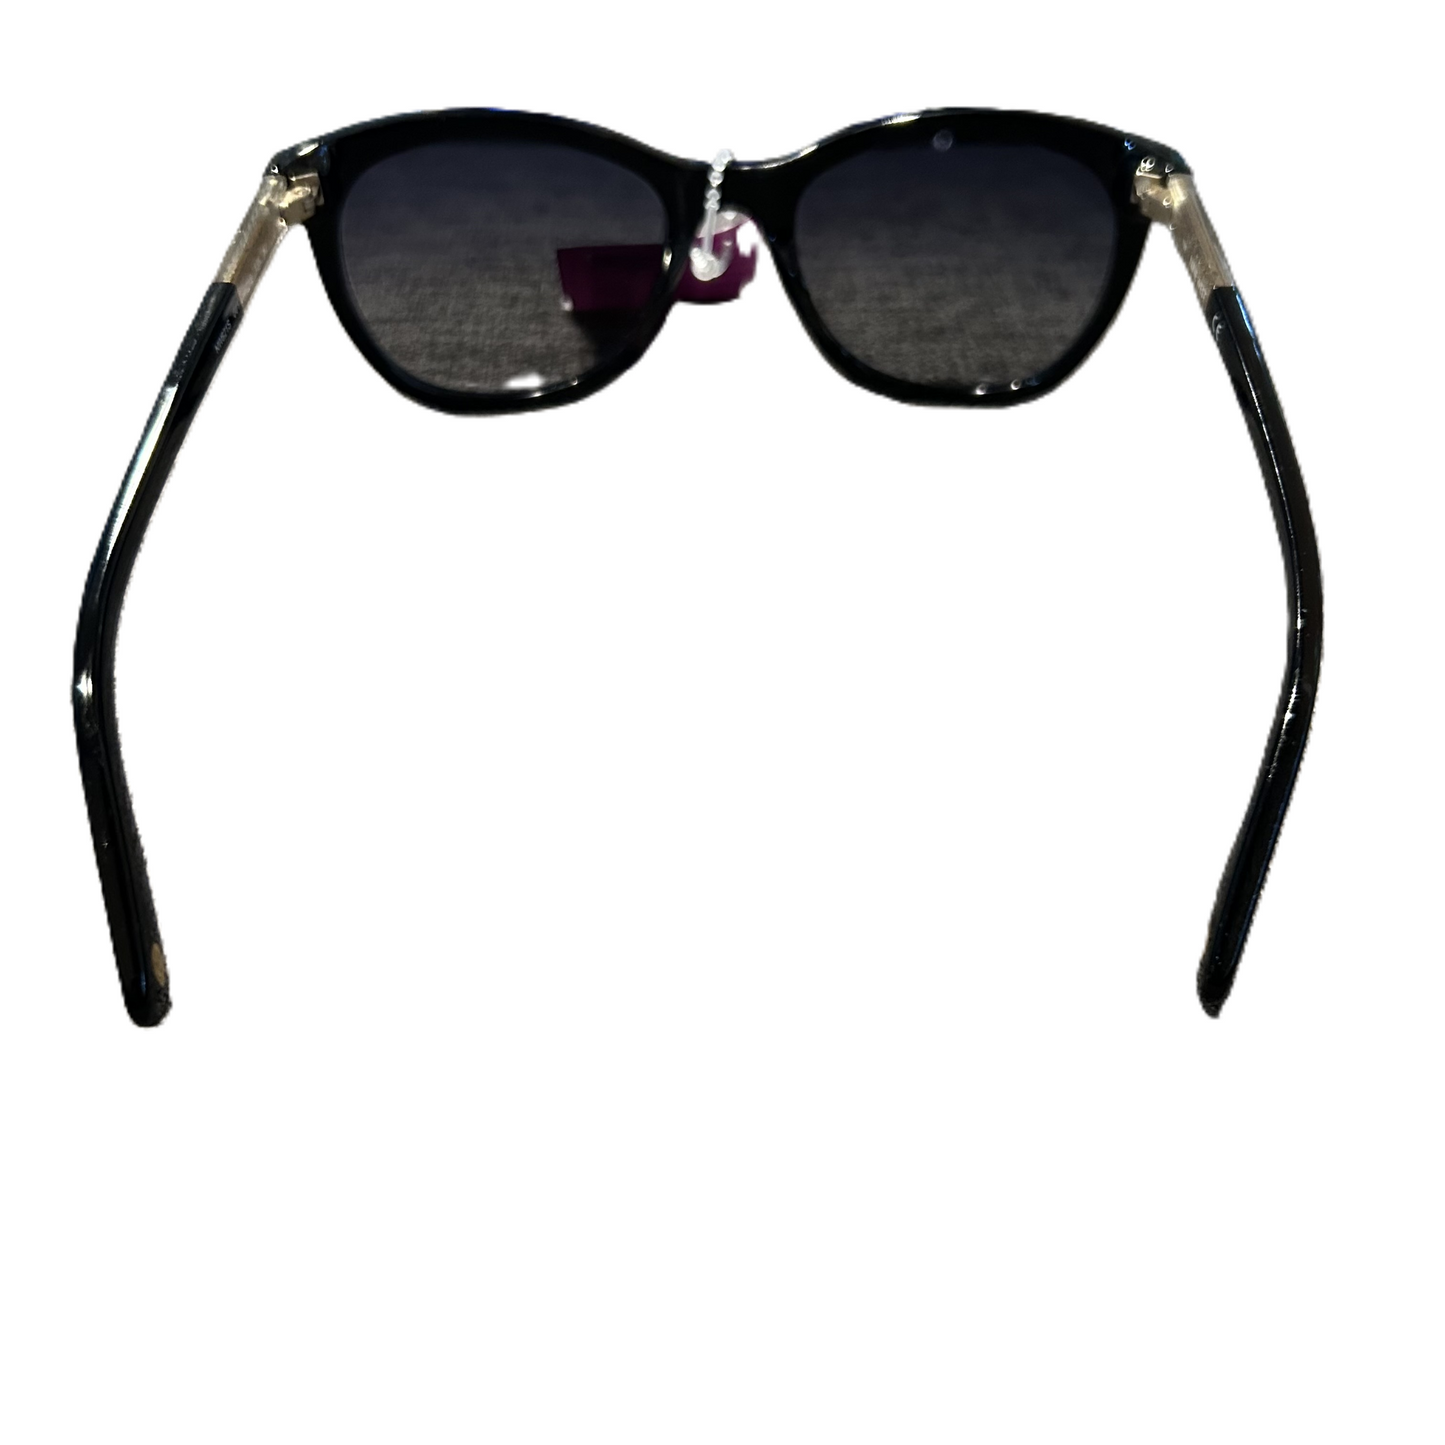 Sunglasses By Nine West